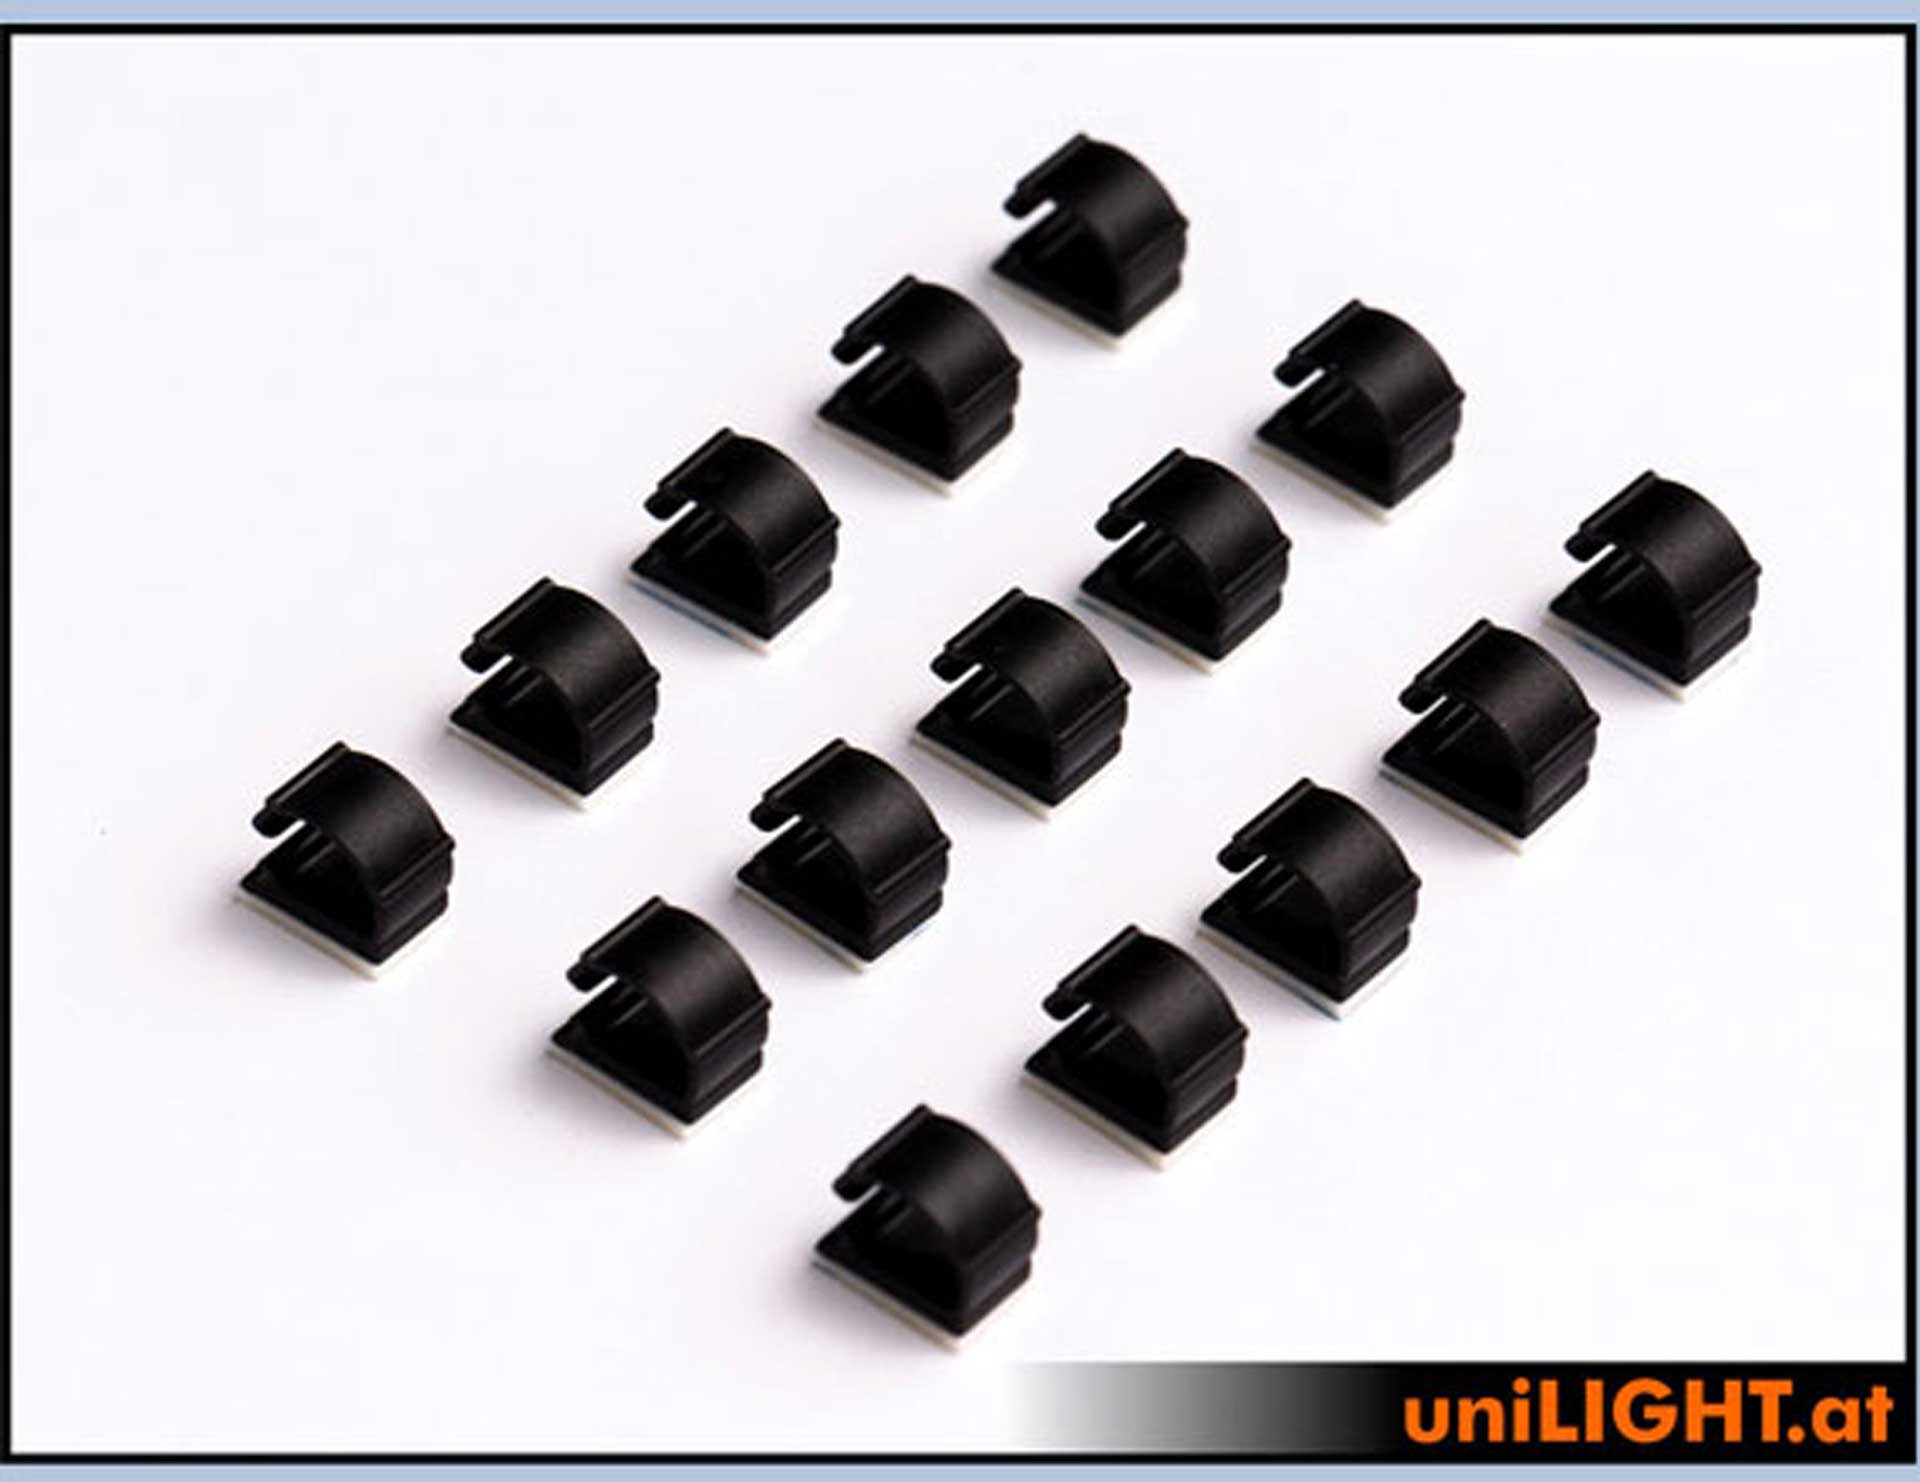 UNILIGHT Easy wiring clips SMALL, 5x6mm, 15pcs